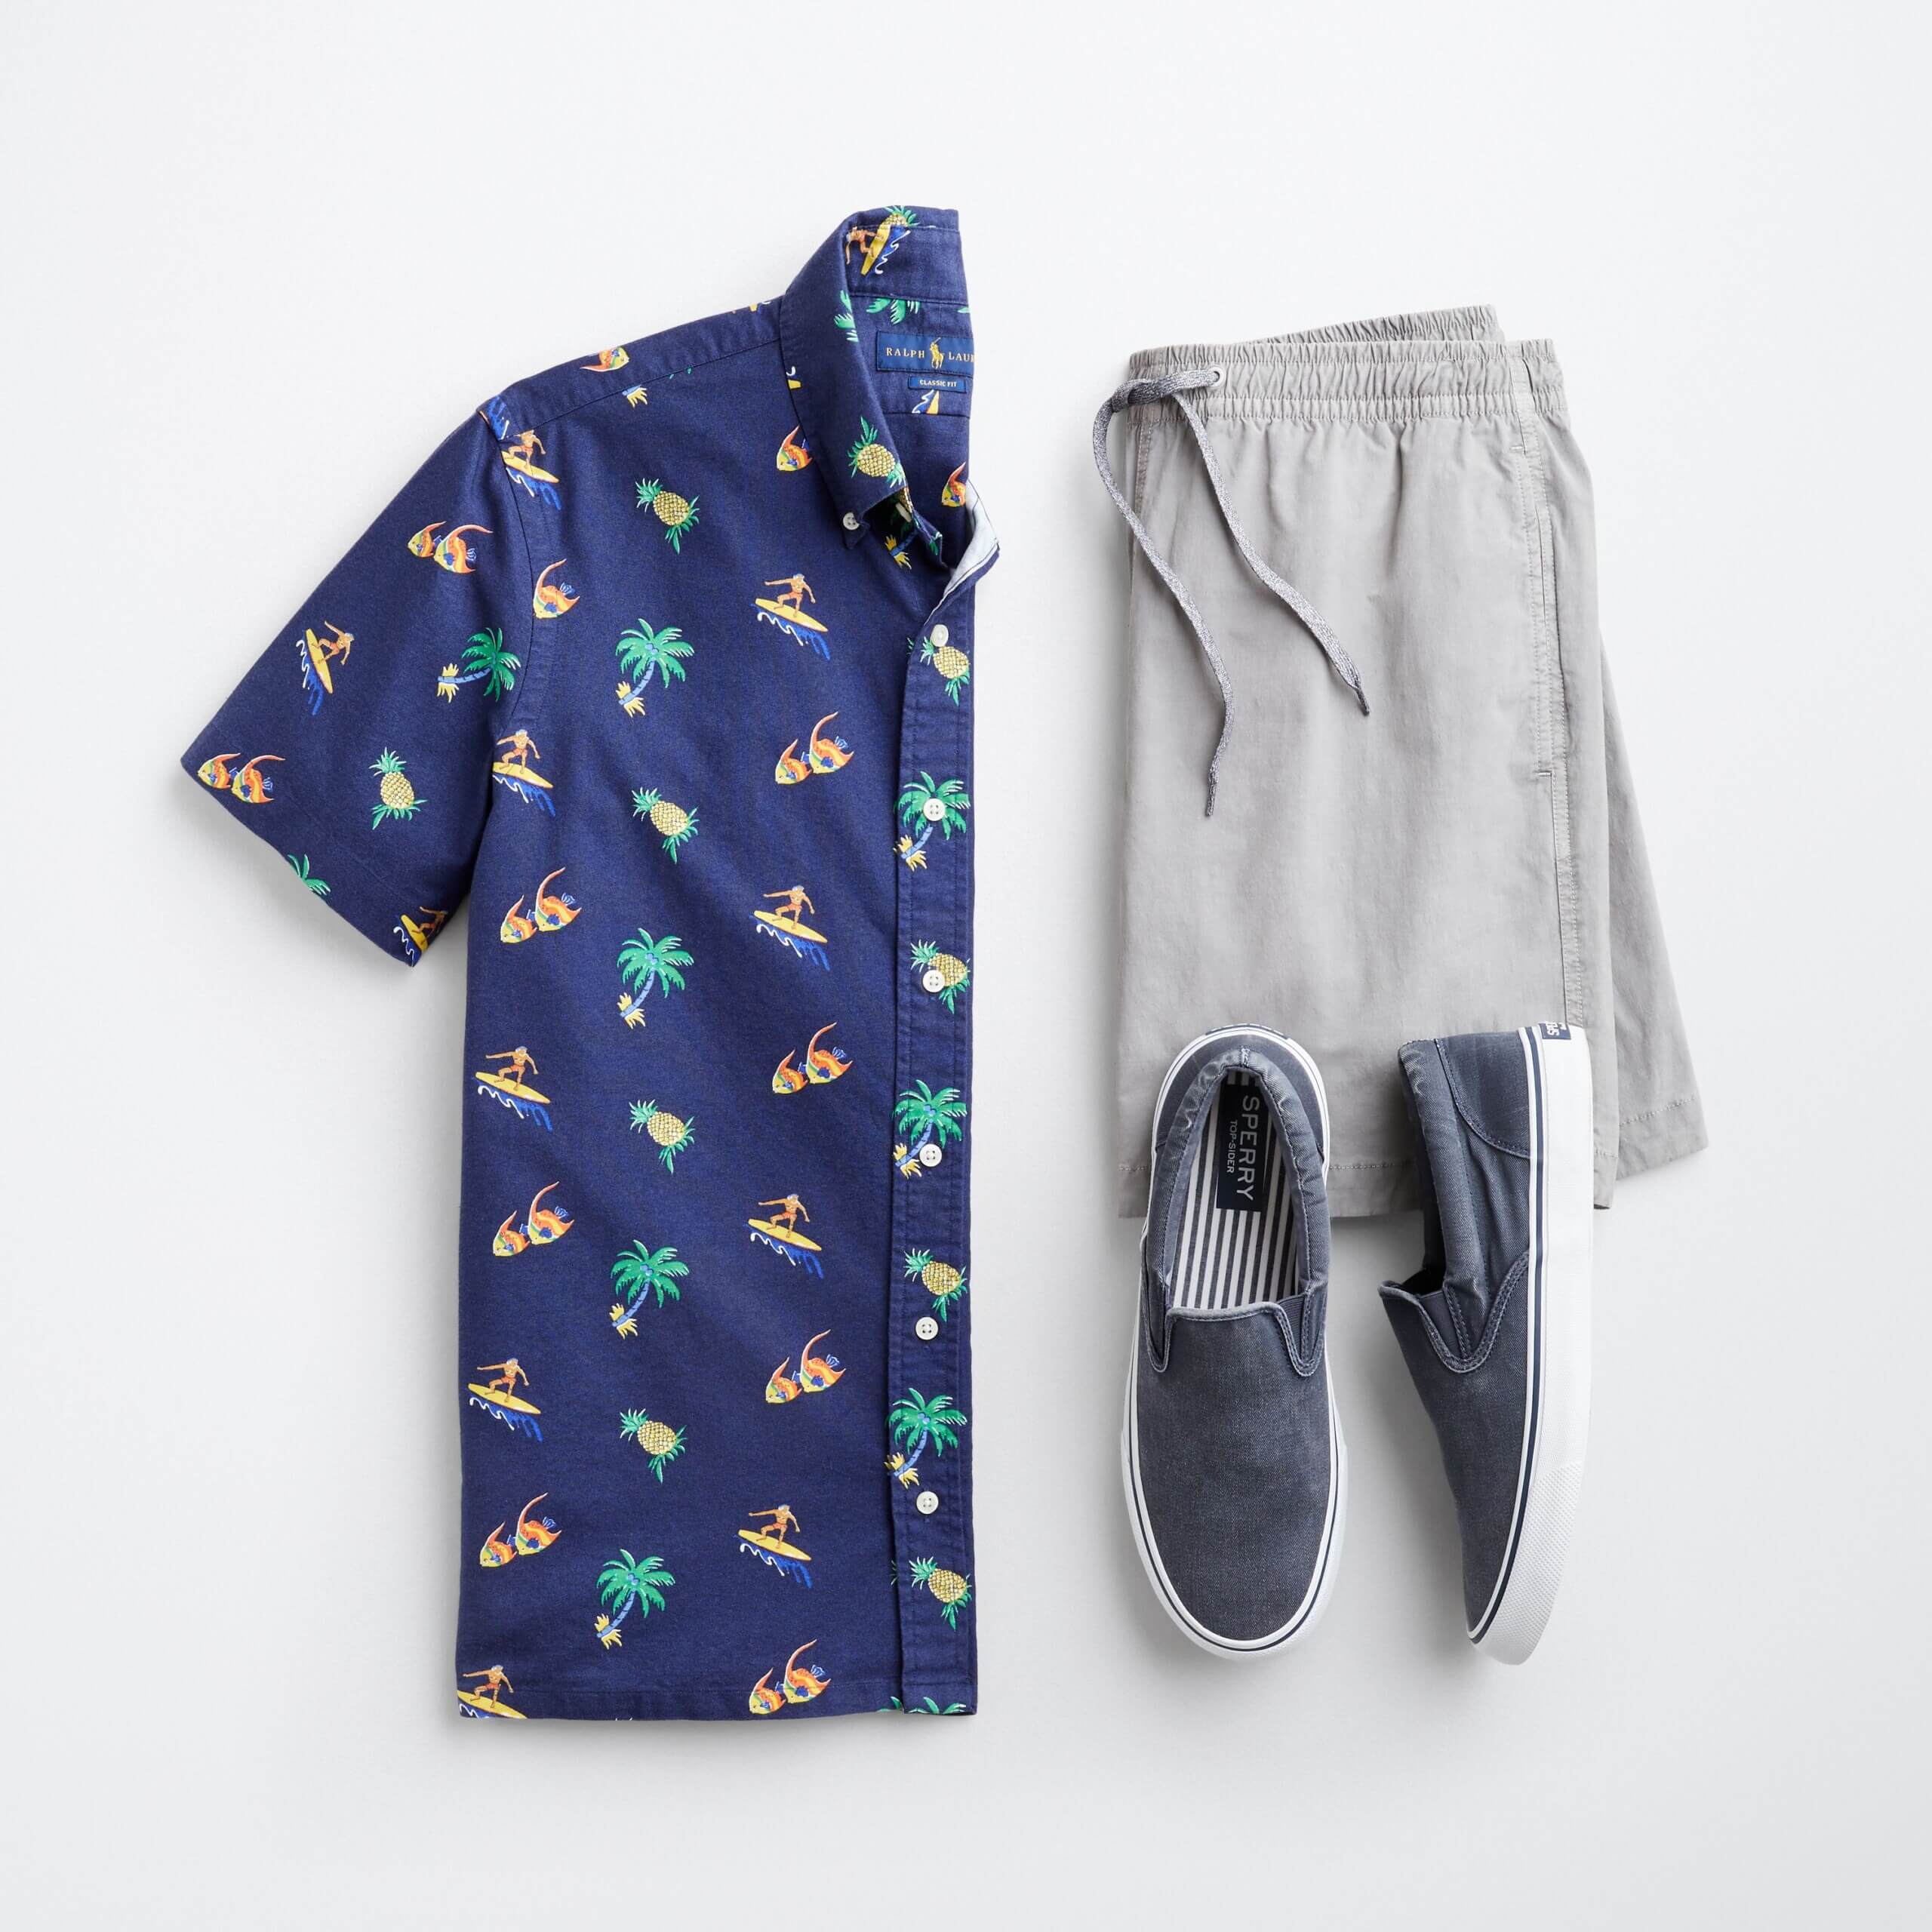 Stitch Fix men's outfit laydown featuring navy blue palm tree print button-down short sleeve shirt, grey shorts and blue canvas sneakers.